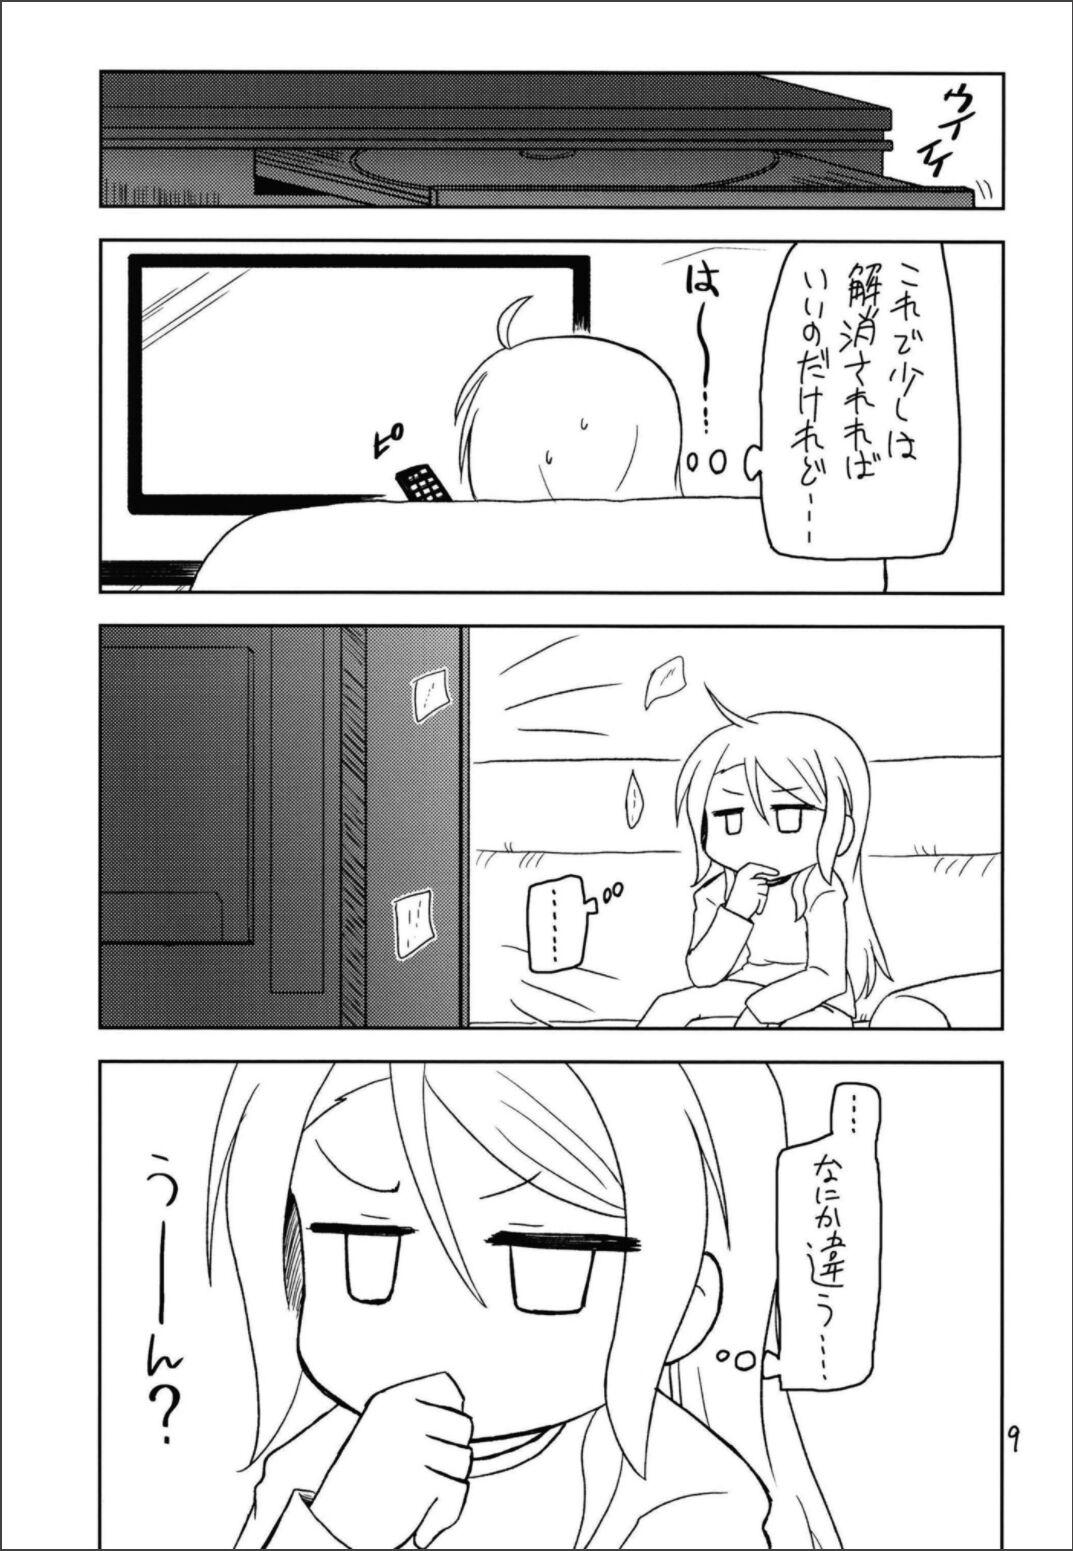 Spy Cam Secret Night - Bang dream From - Page 11